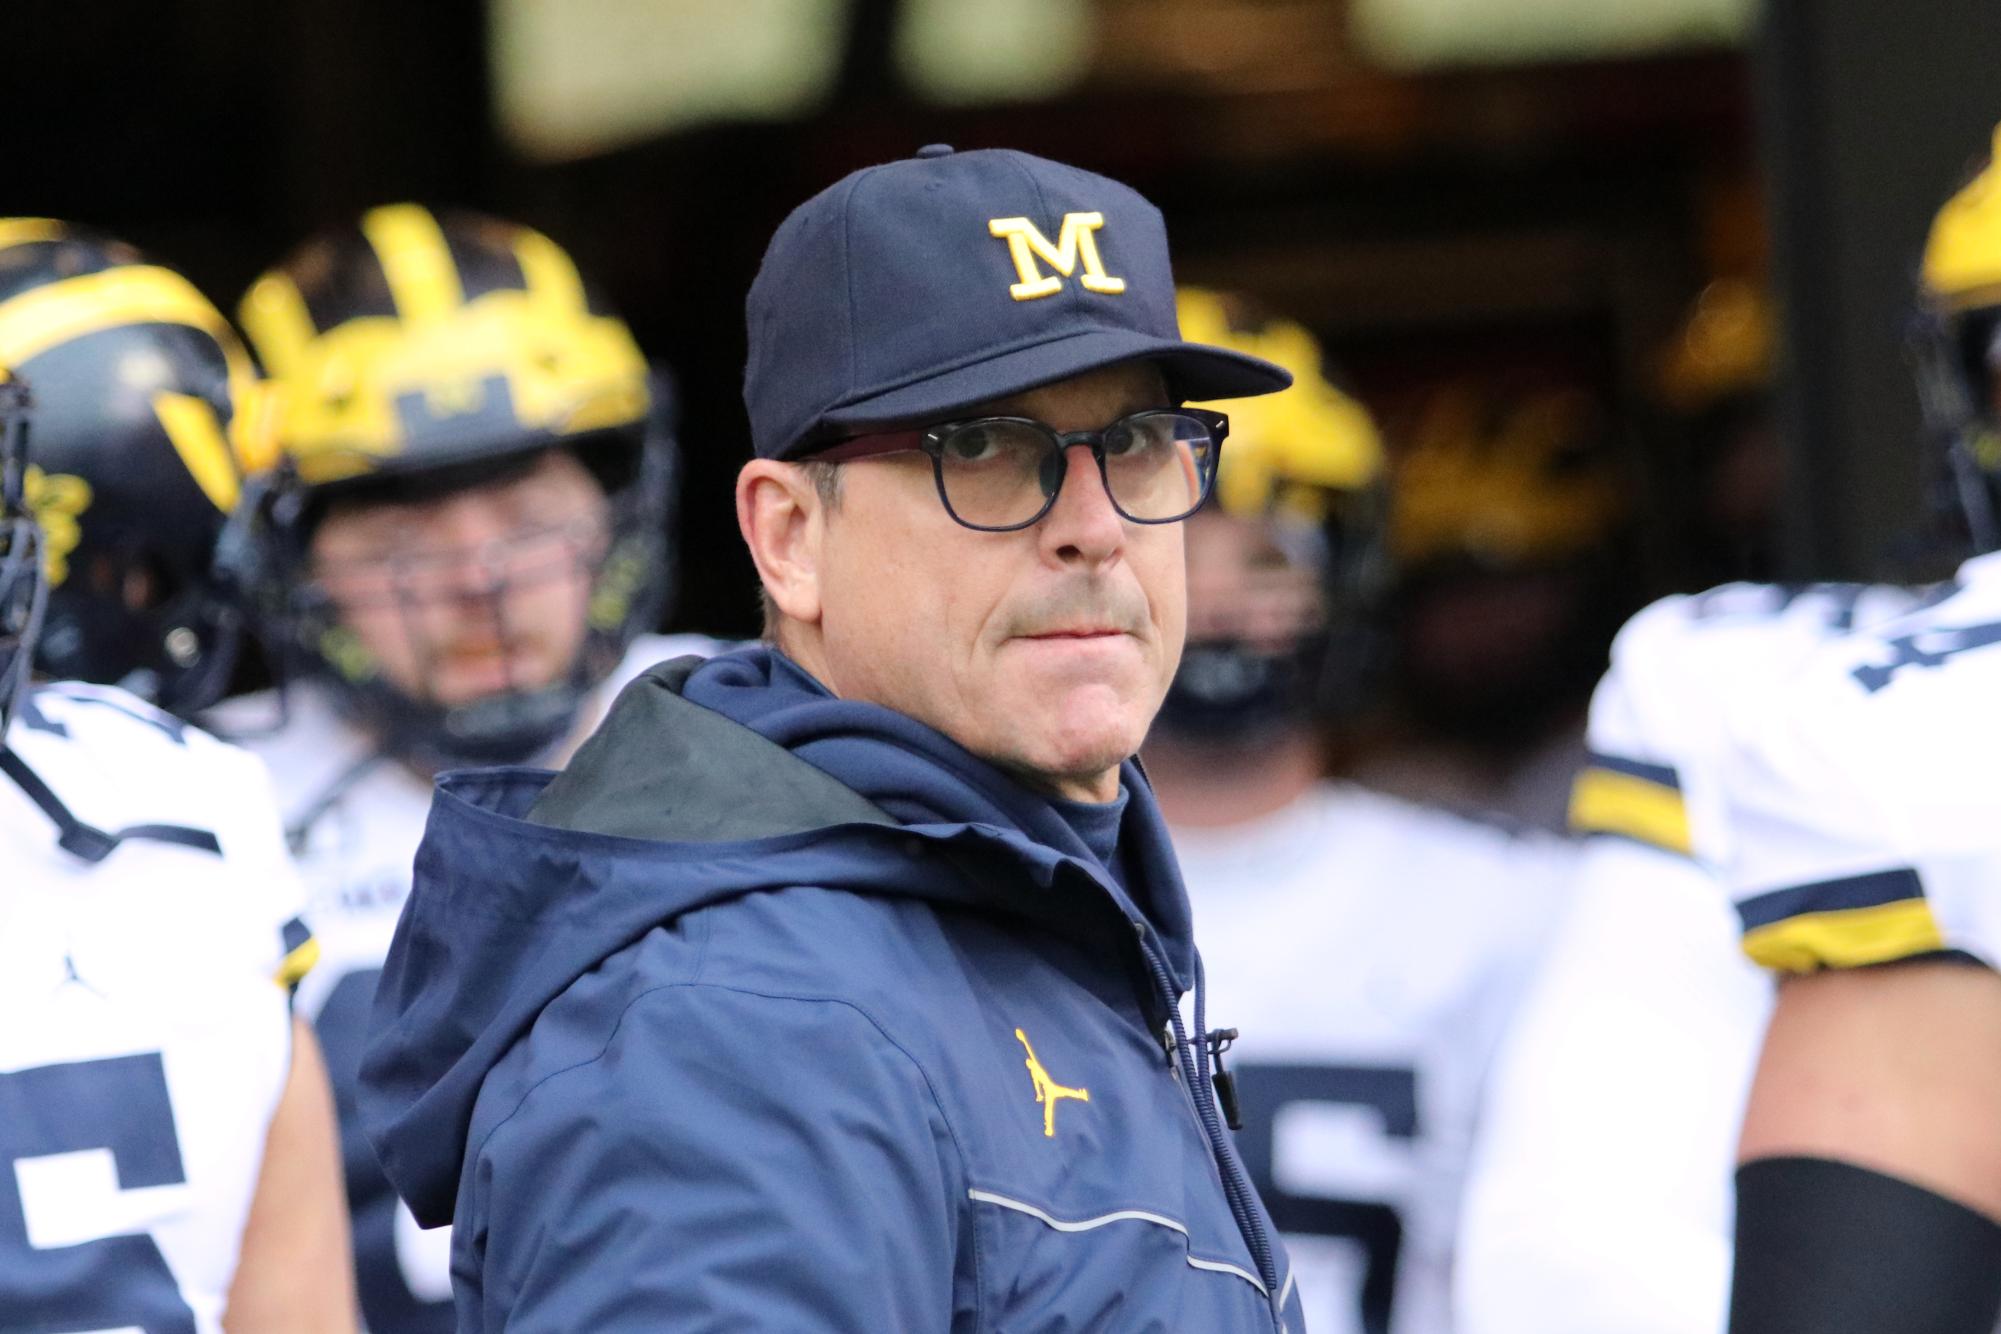 Coach Jim Harbaugh has led the Michigan Wolverines for numerous seasons, but found himself suspended this year for three games. (Royalty-free photo courtesy of Maize & Blue Nation via Wikimedia Commons)